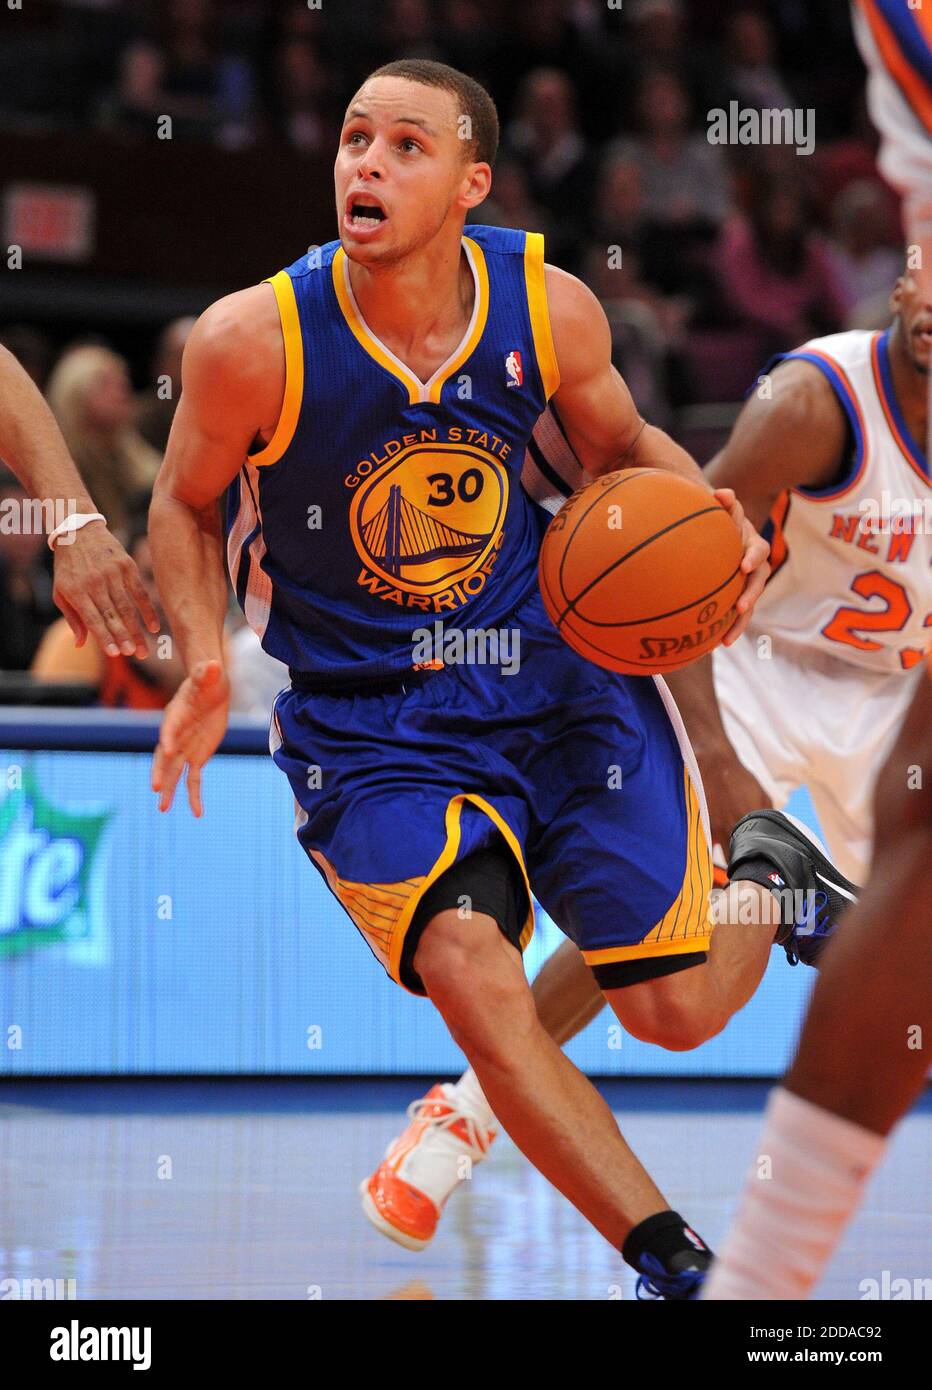 NO FILM, NO VIDEO, NO TV, NO DOCUMENTARY - Golden State Warriors' Stephen  Curry drives to the basket in the second half during the NBA Basketball  match, New York Knicks vs Golden